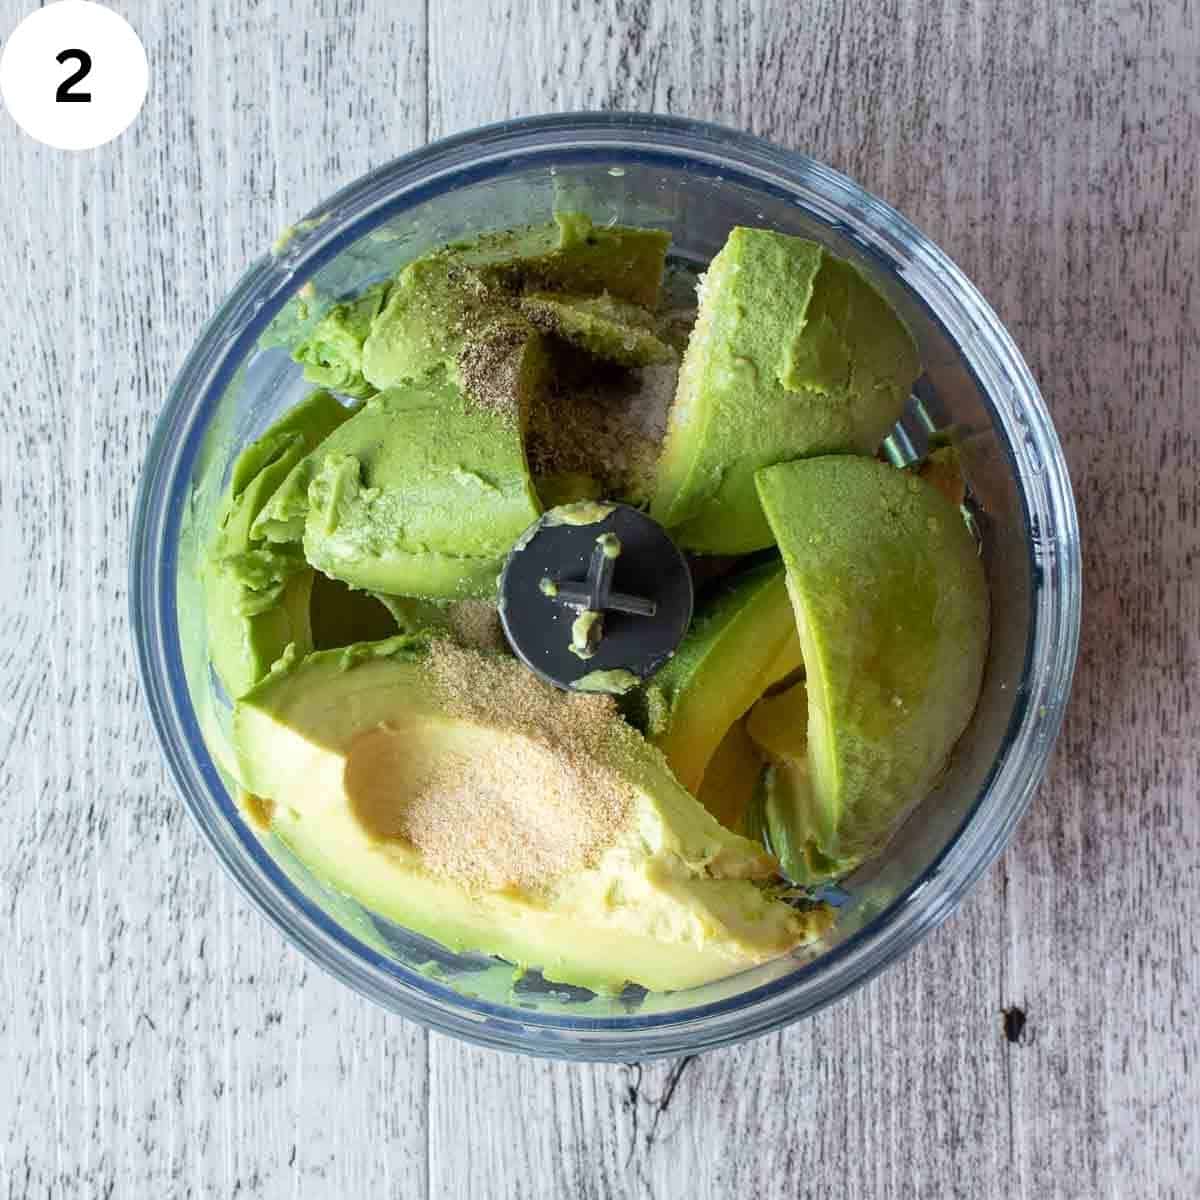 Avocado and other ingredients in a mini food processor.